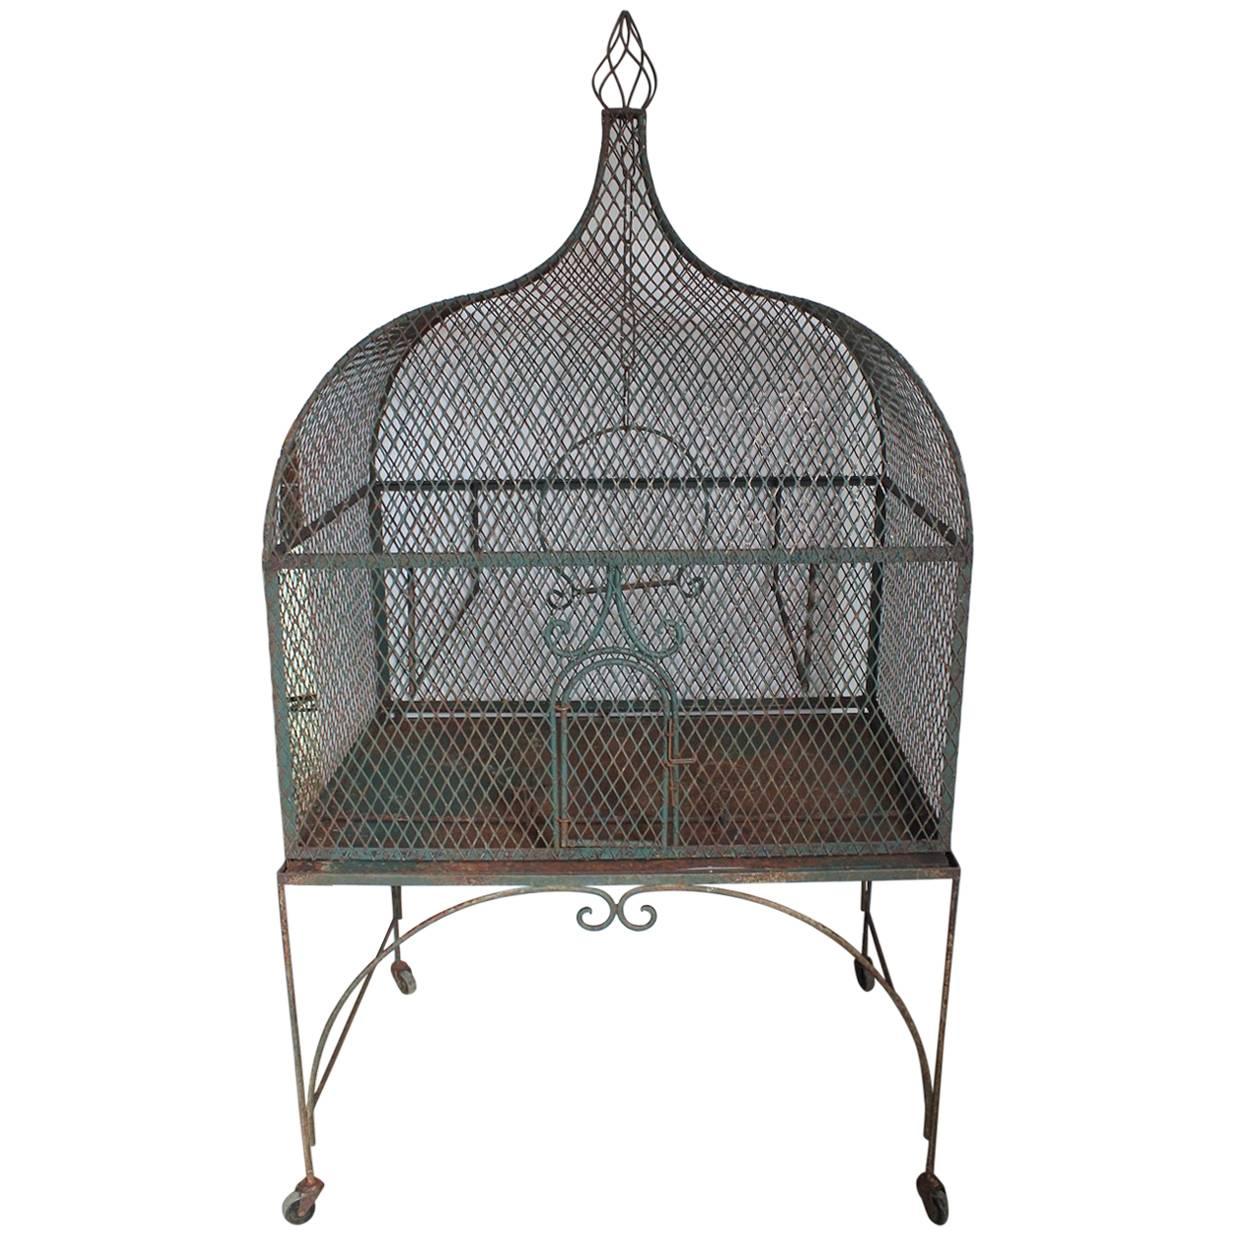 19th Century French Wrought Iron Bird Cage